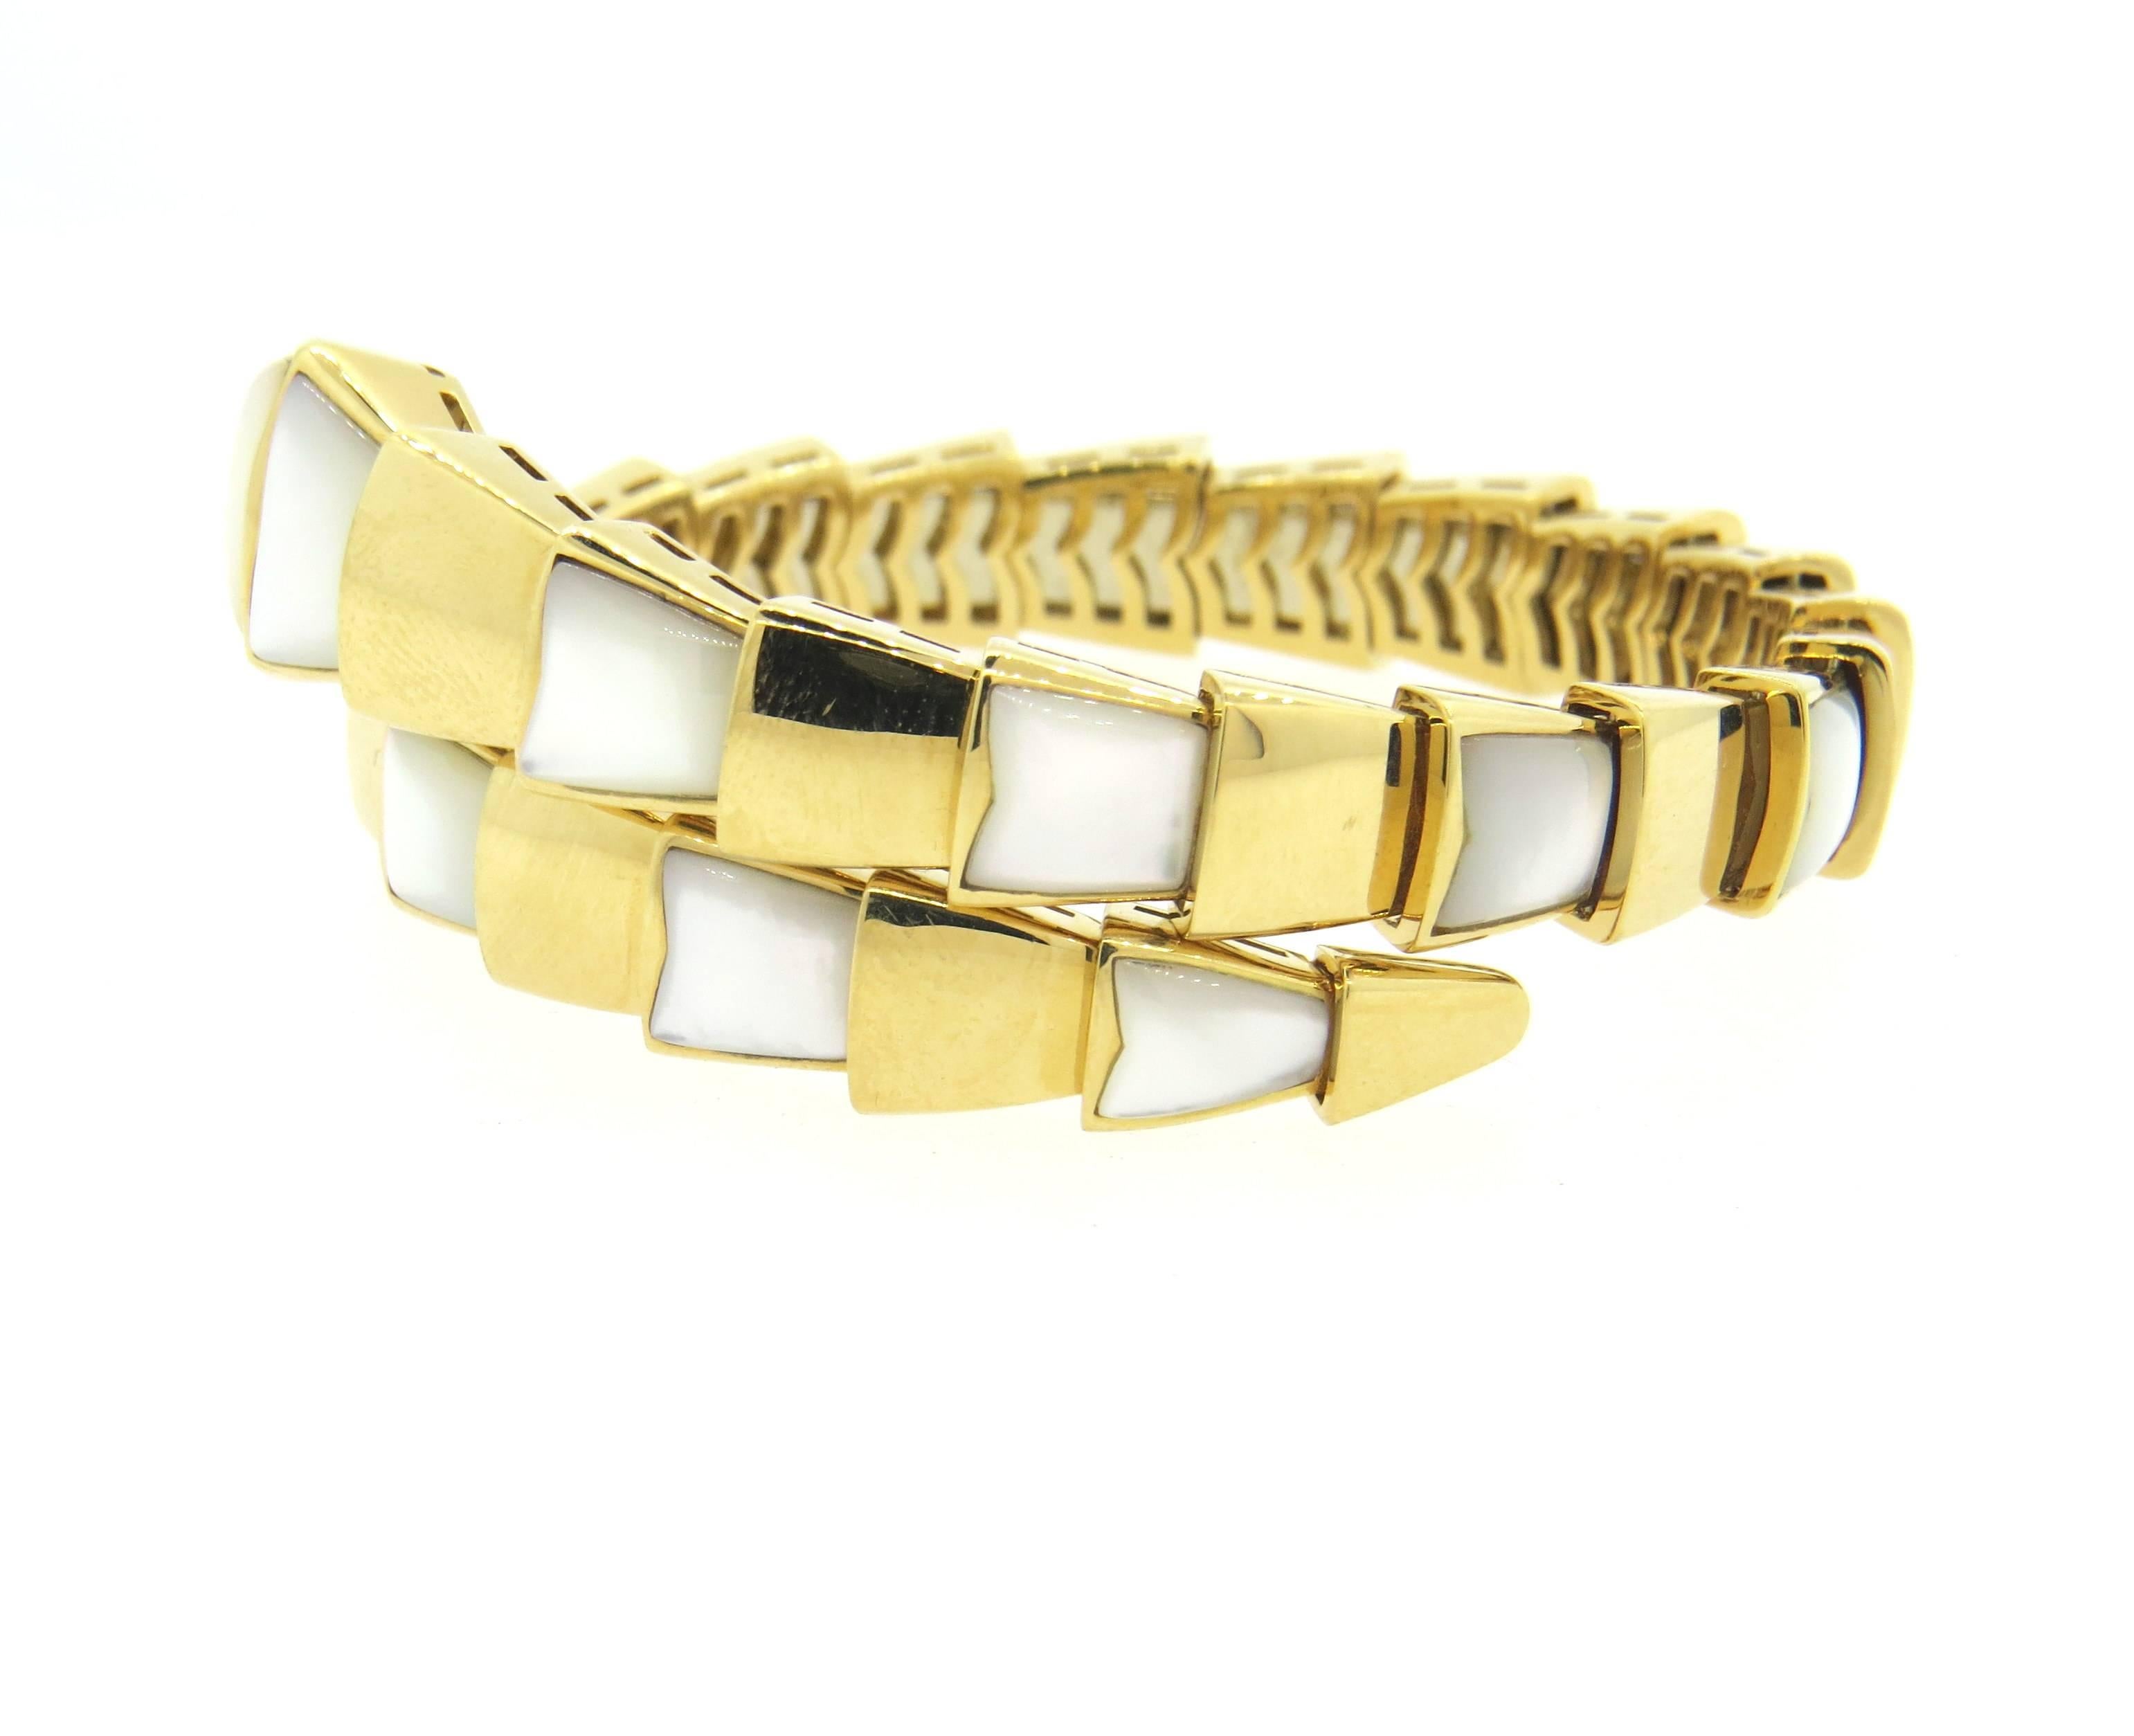 New impressive 18k yellow gold wrap snake bracelet, crafted by Bulgari for Serpenti collection, decorated with mother of pearl. Bracelet will fit up to 7